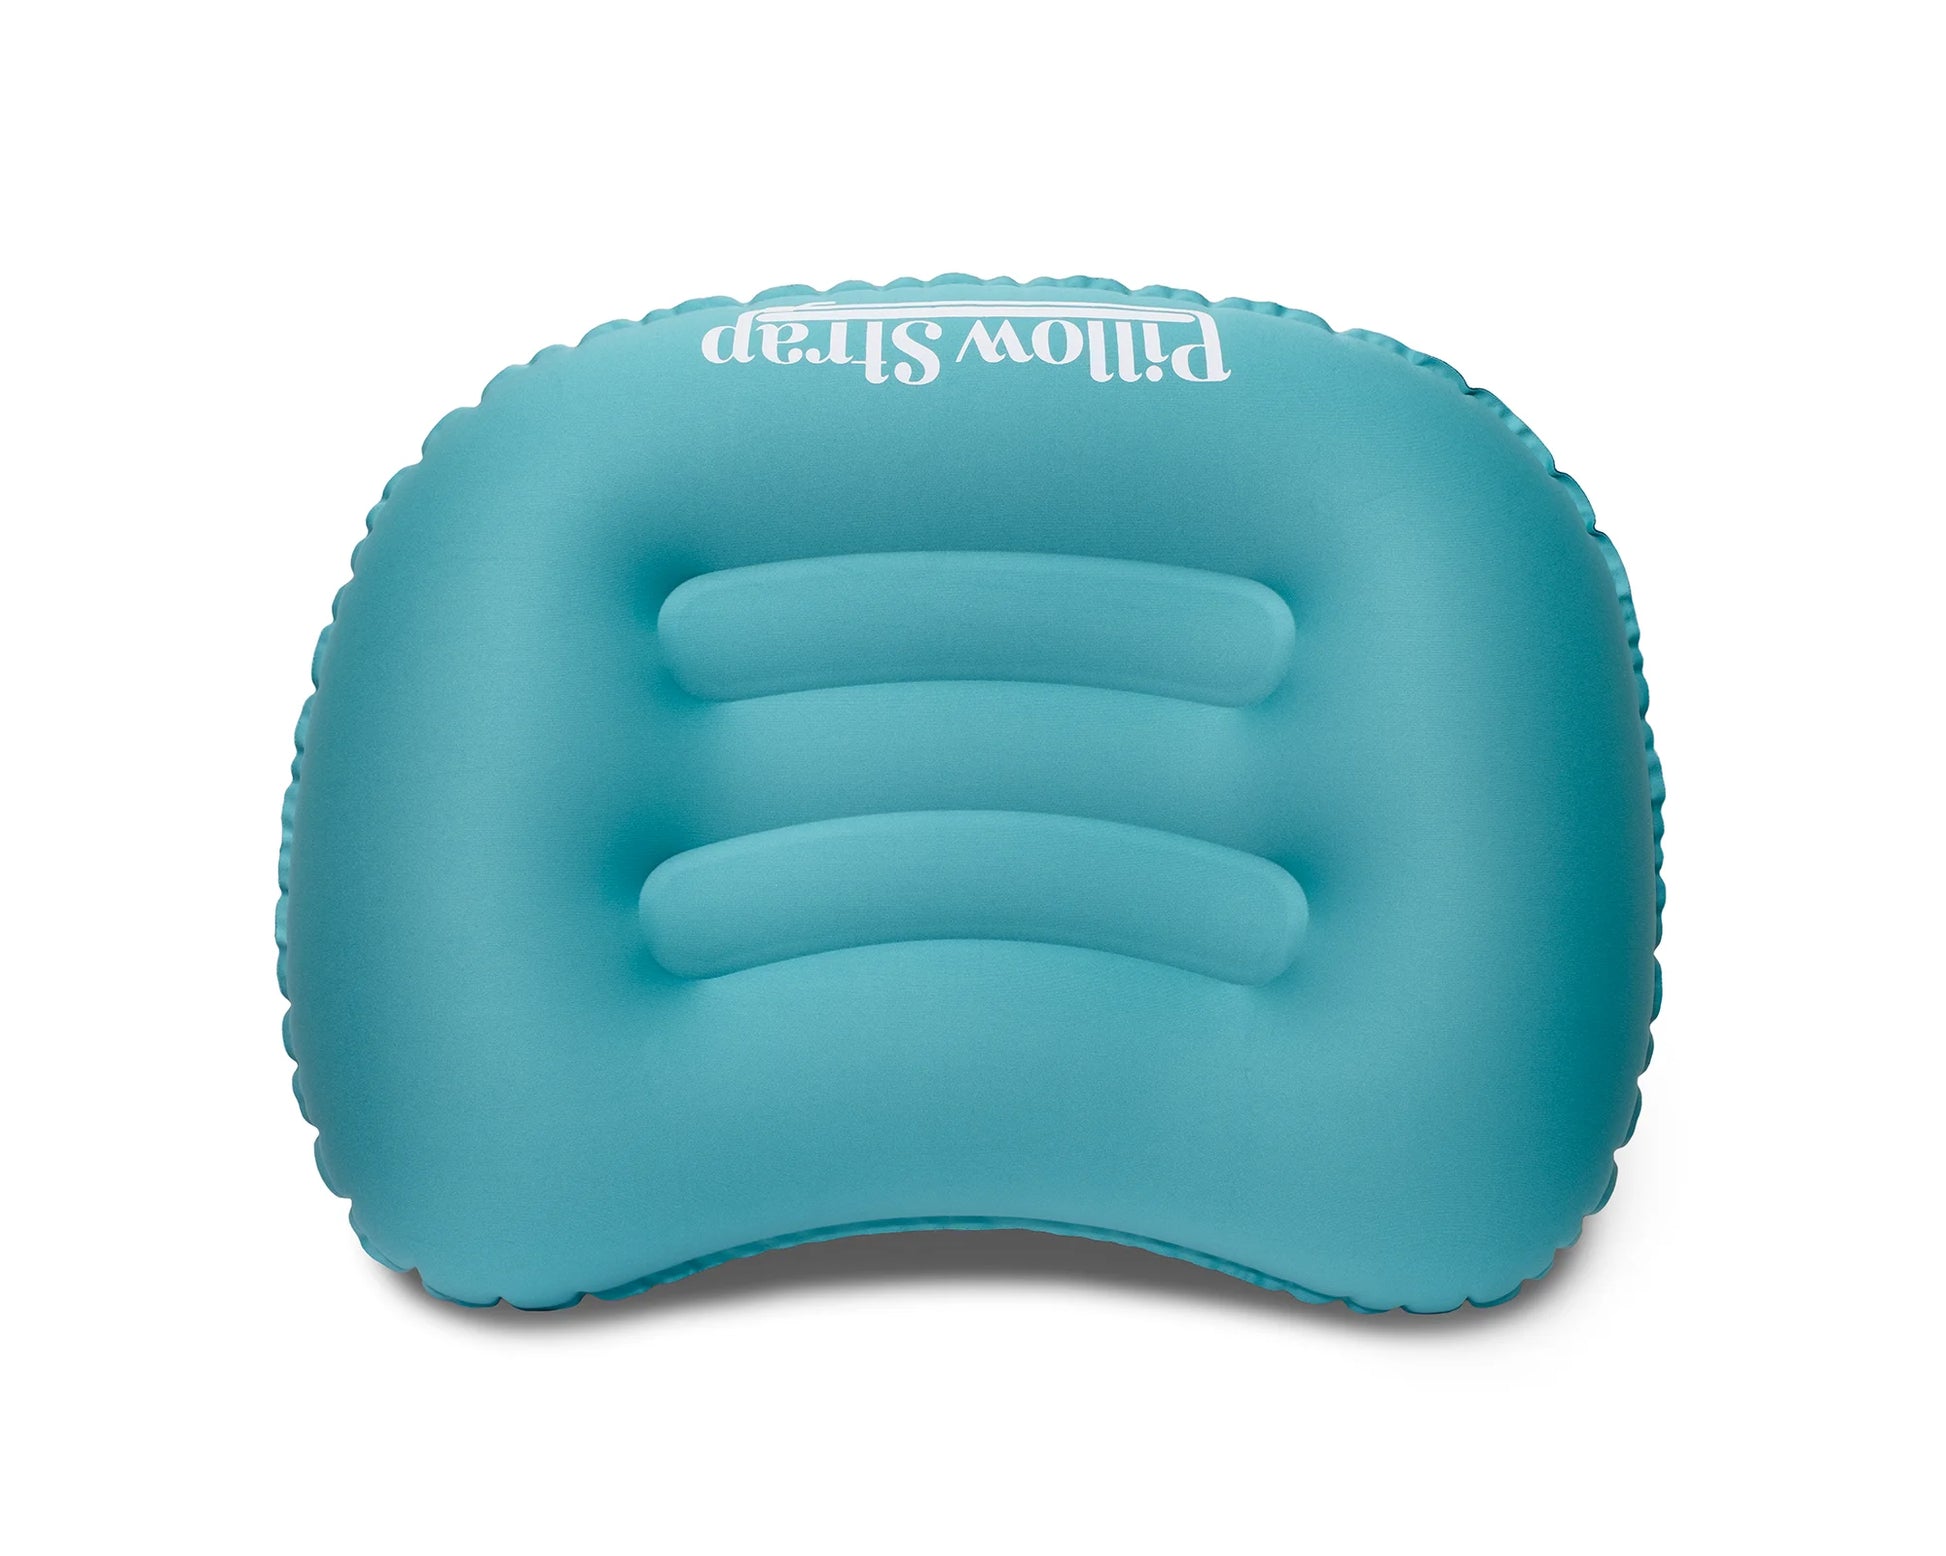 The Camp Pillow, lightweight inflatable camping and backpacking pillow. Overhead view